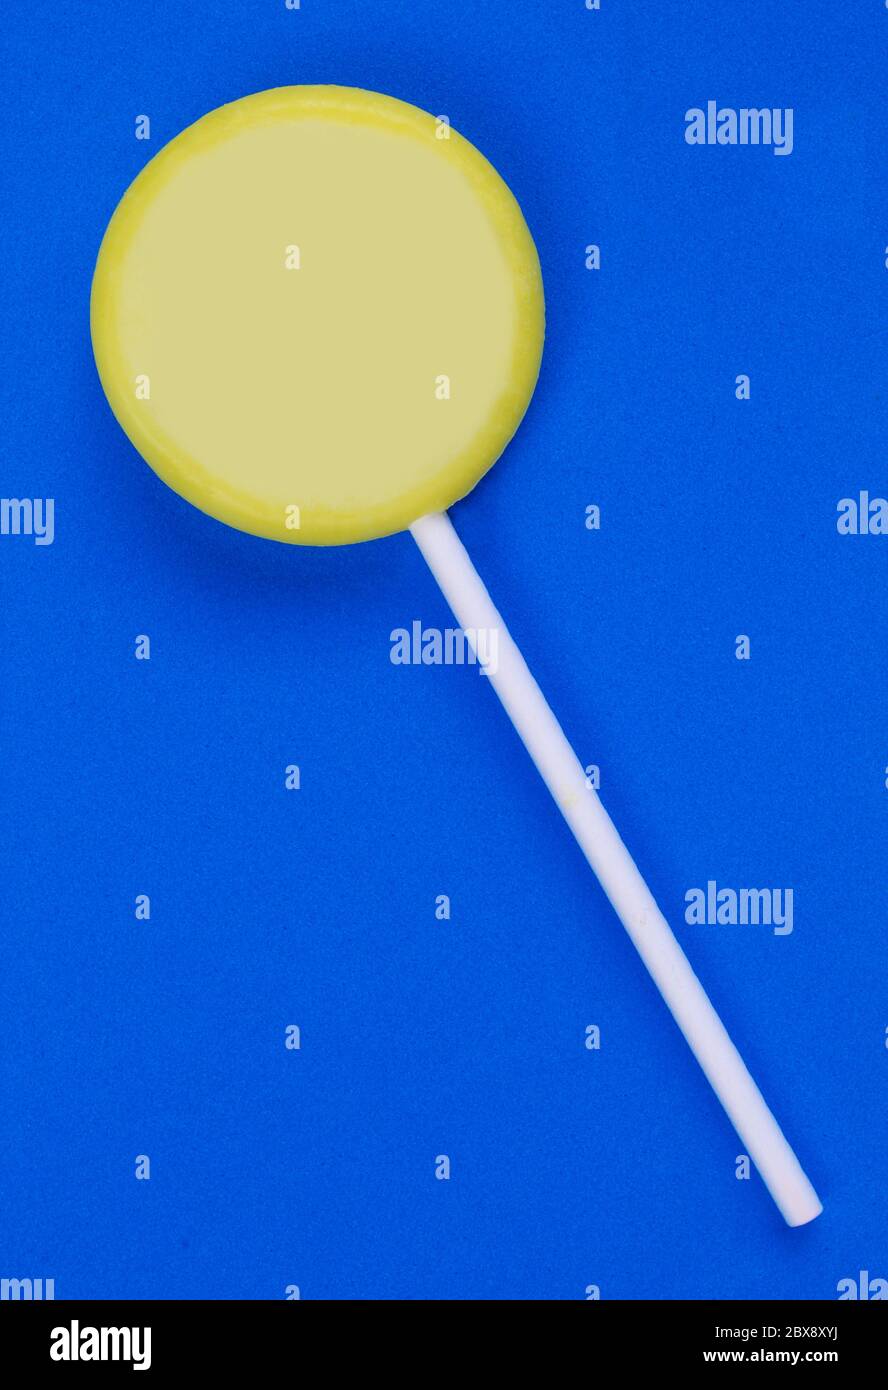 Simple yellow lollipop isolated on blue background. Stock Photo